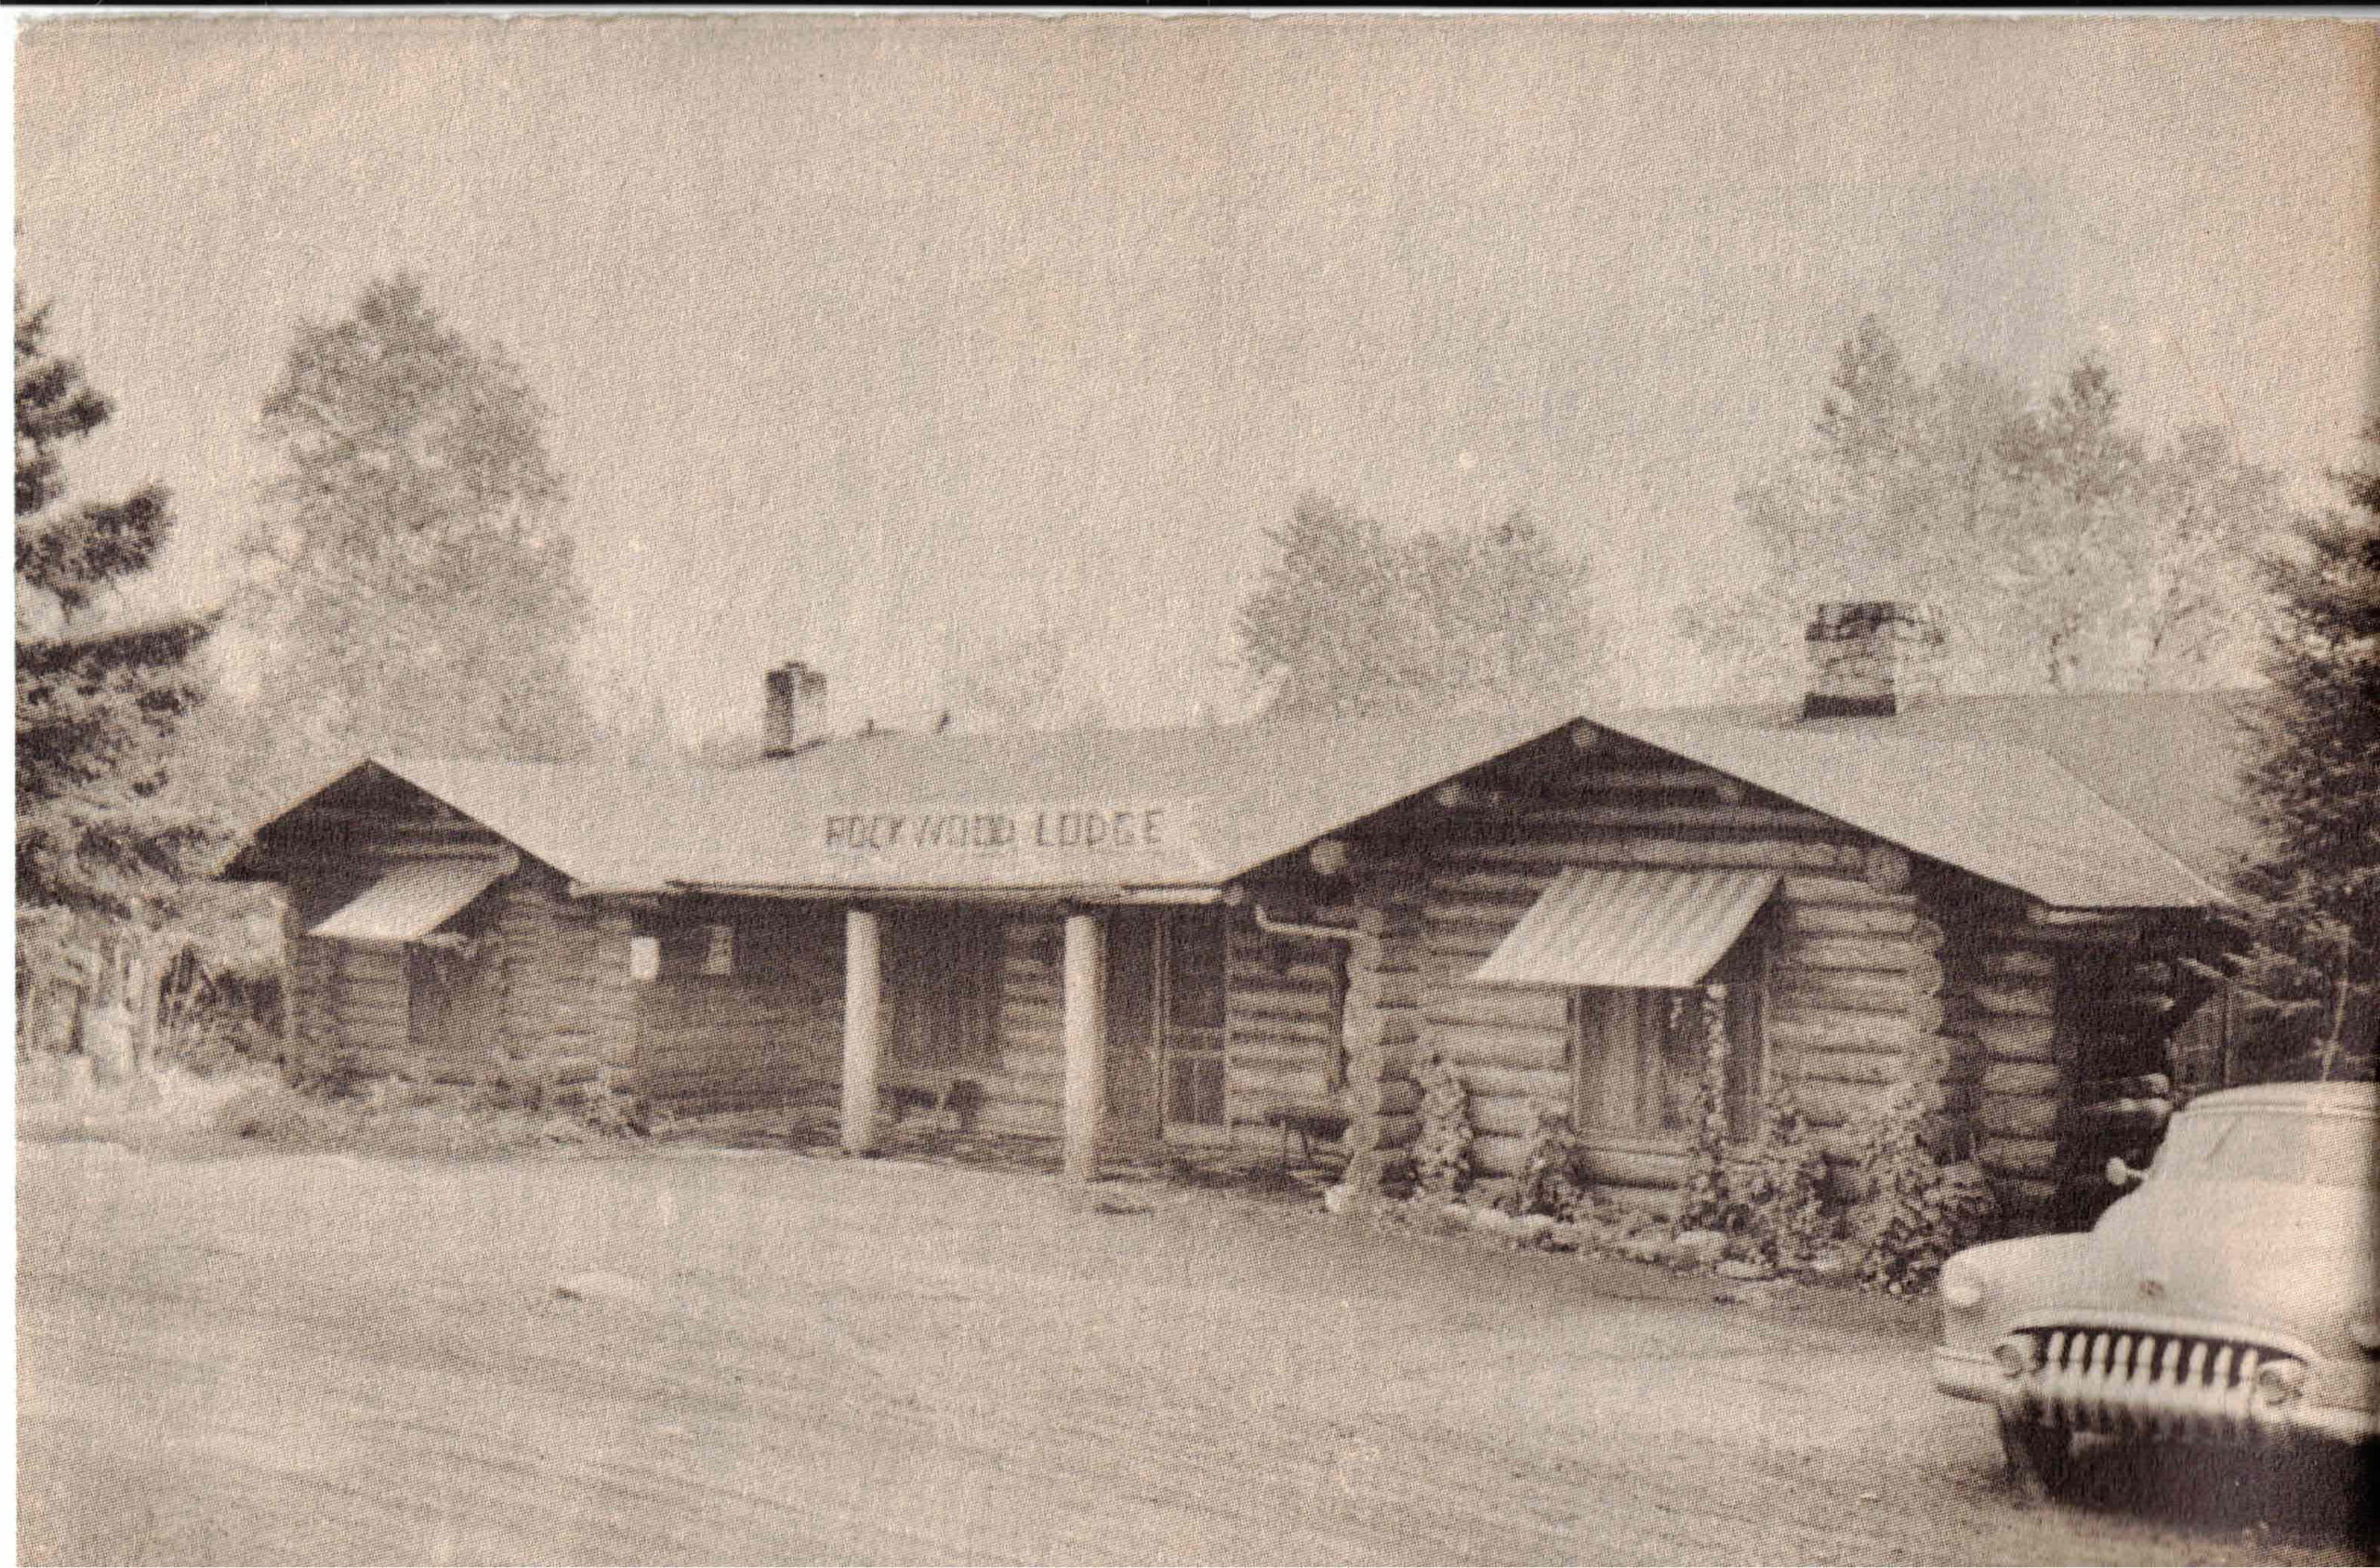 Rockwood Lodge in the early 1950s